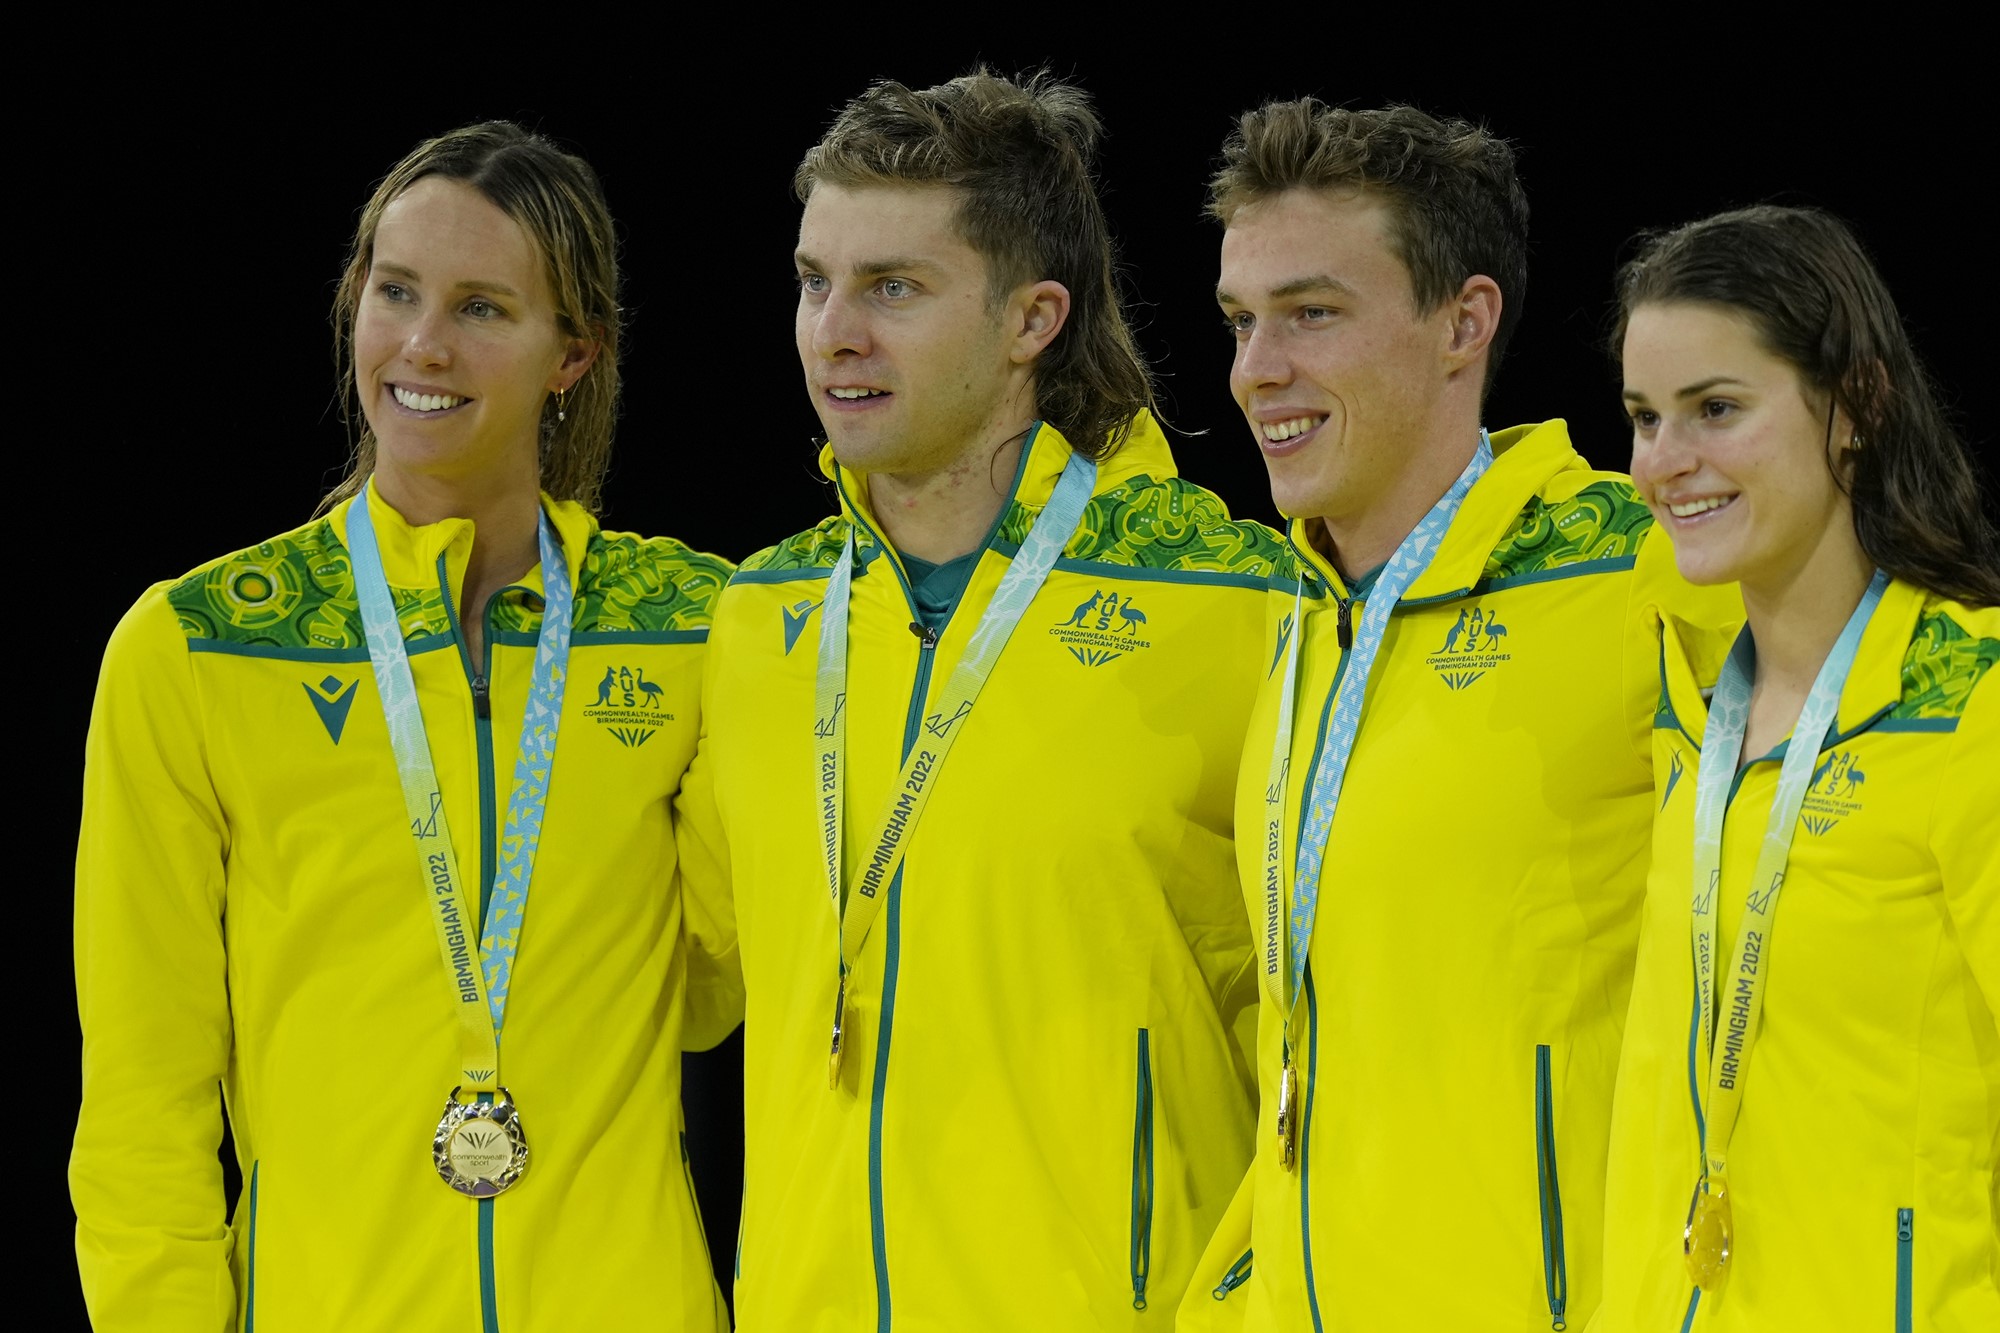 Australian swimmers Emma McKeon, Matthew Temple, Zac Stubblety-Cook and Kaylee McKeown wear their Commonwealth Games medals as they pose for a photo.